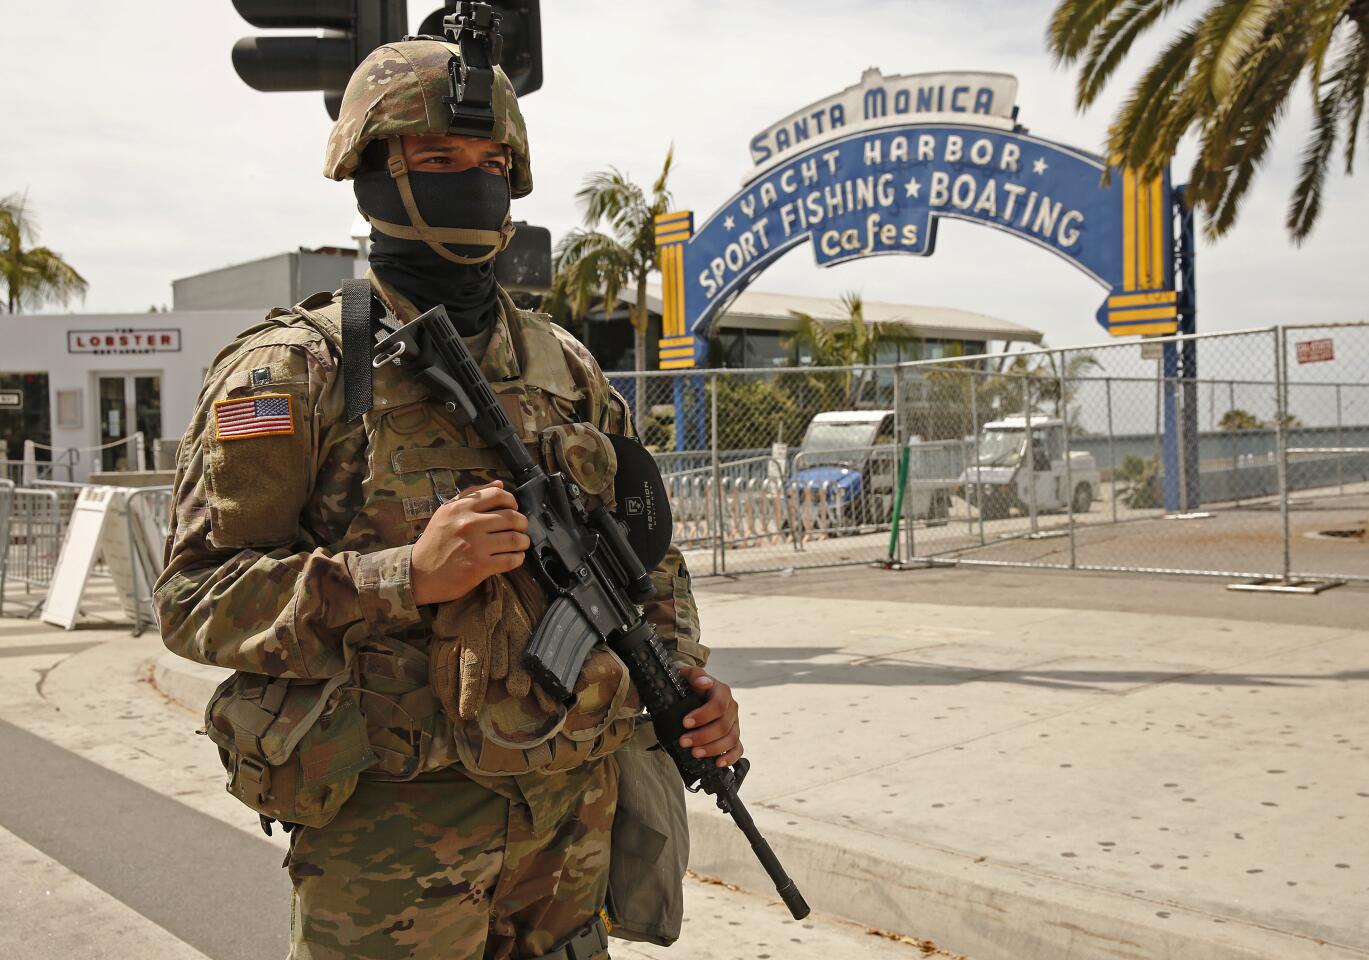 A National Guard soldier at the Santa Monica Pier.